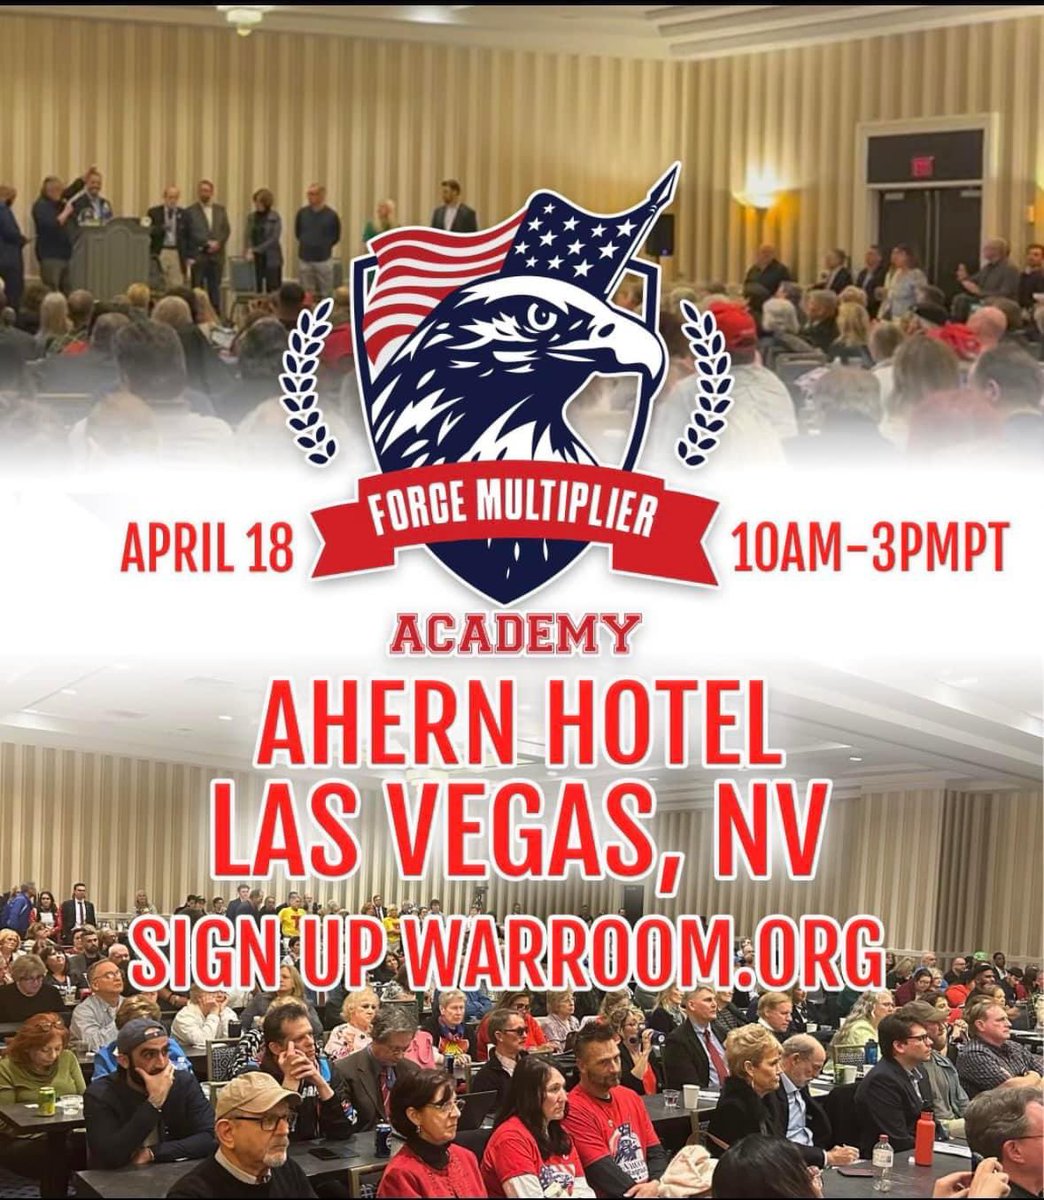 We promised Nevada’s Republicans an exciting 2024. Ask and you shall receive🇺🇸The @NVGOP can’t wait to see everyone at Steve Bannon’s Gladiator Force Multiplier Academy on April 18! SIGN UP: warroom.org/wfma/